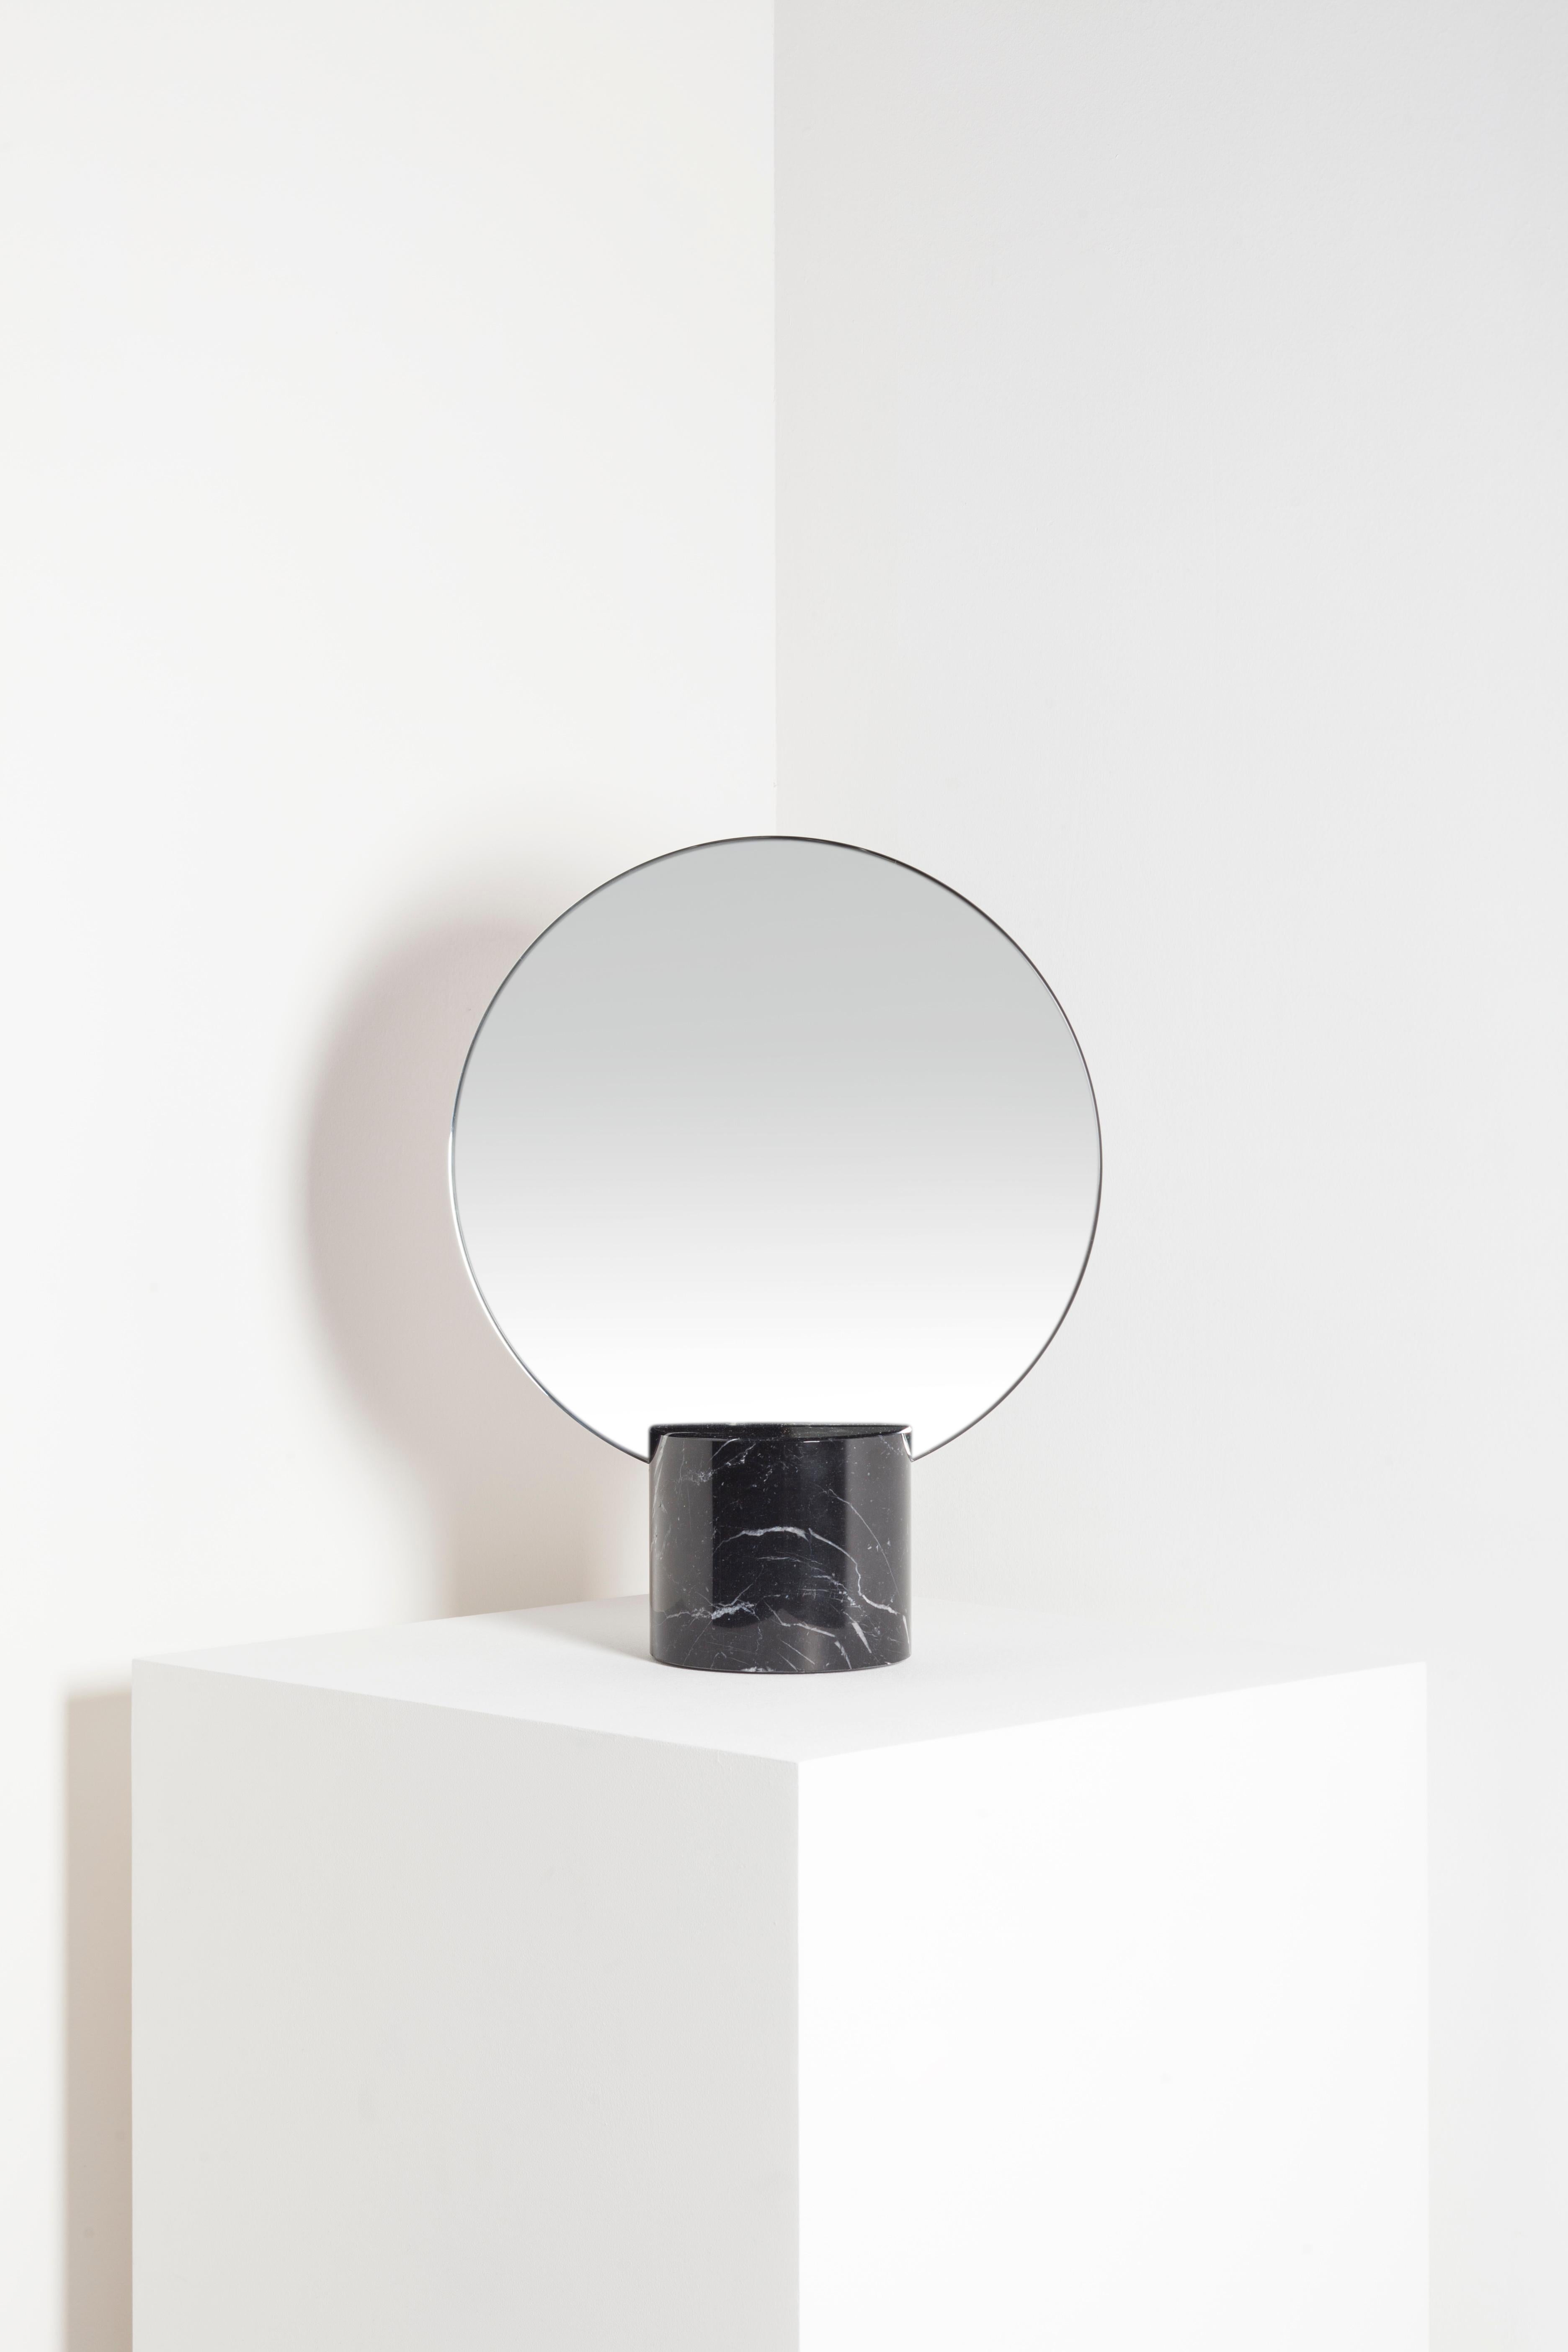 Sun Marquina marble mirror by Joseph Vila Capdevila
Material: Marquina marble, brass and mirror
Dimensions: 30 x 38 x 12 cm
Weight: 4.7 kg

Luxurious mirror in two separated parts: the base, made with premium Carrara marble, and mirror, that can be